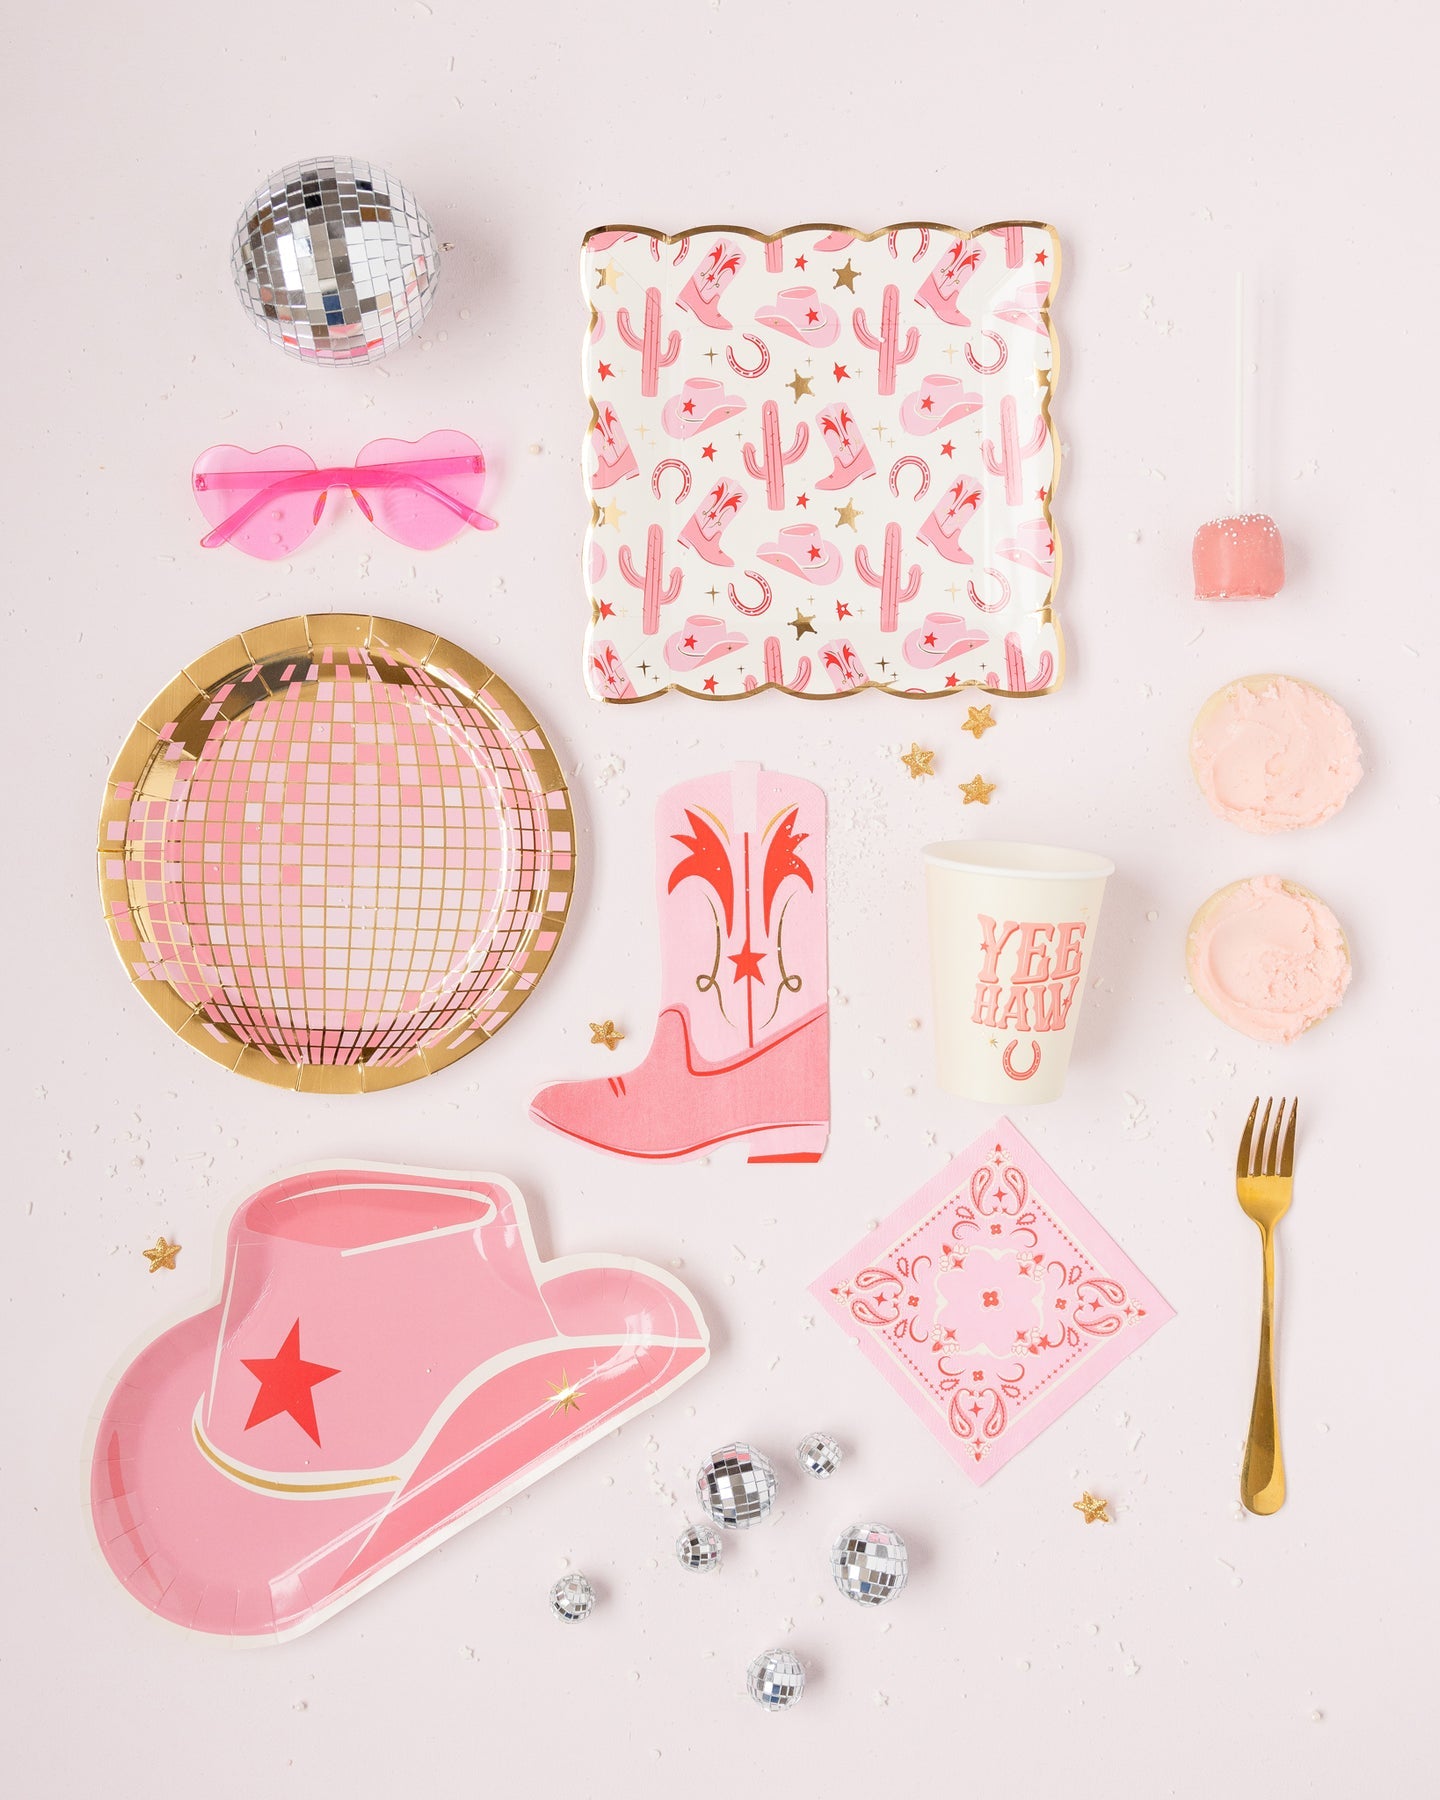 disco cowgirl flatlay with all the pink disco cowgirl items we carry